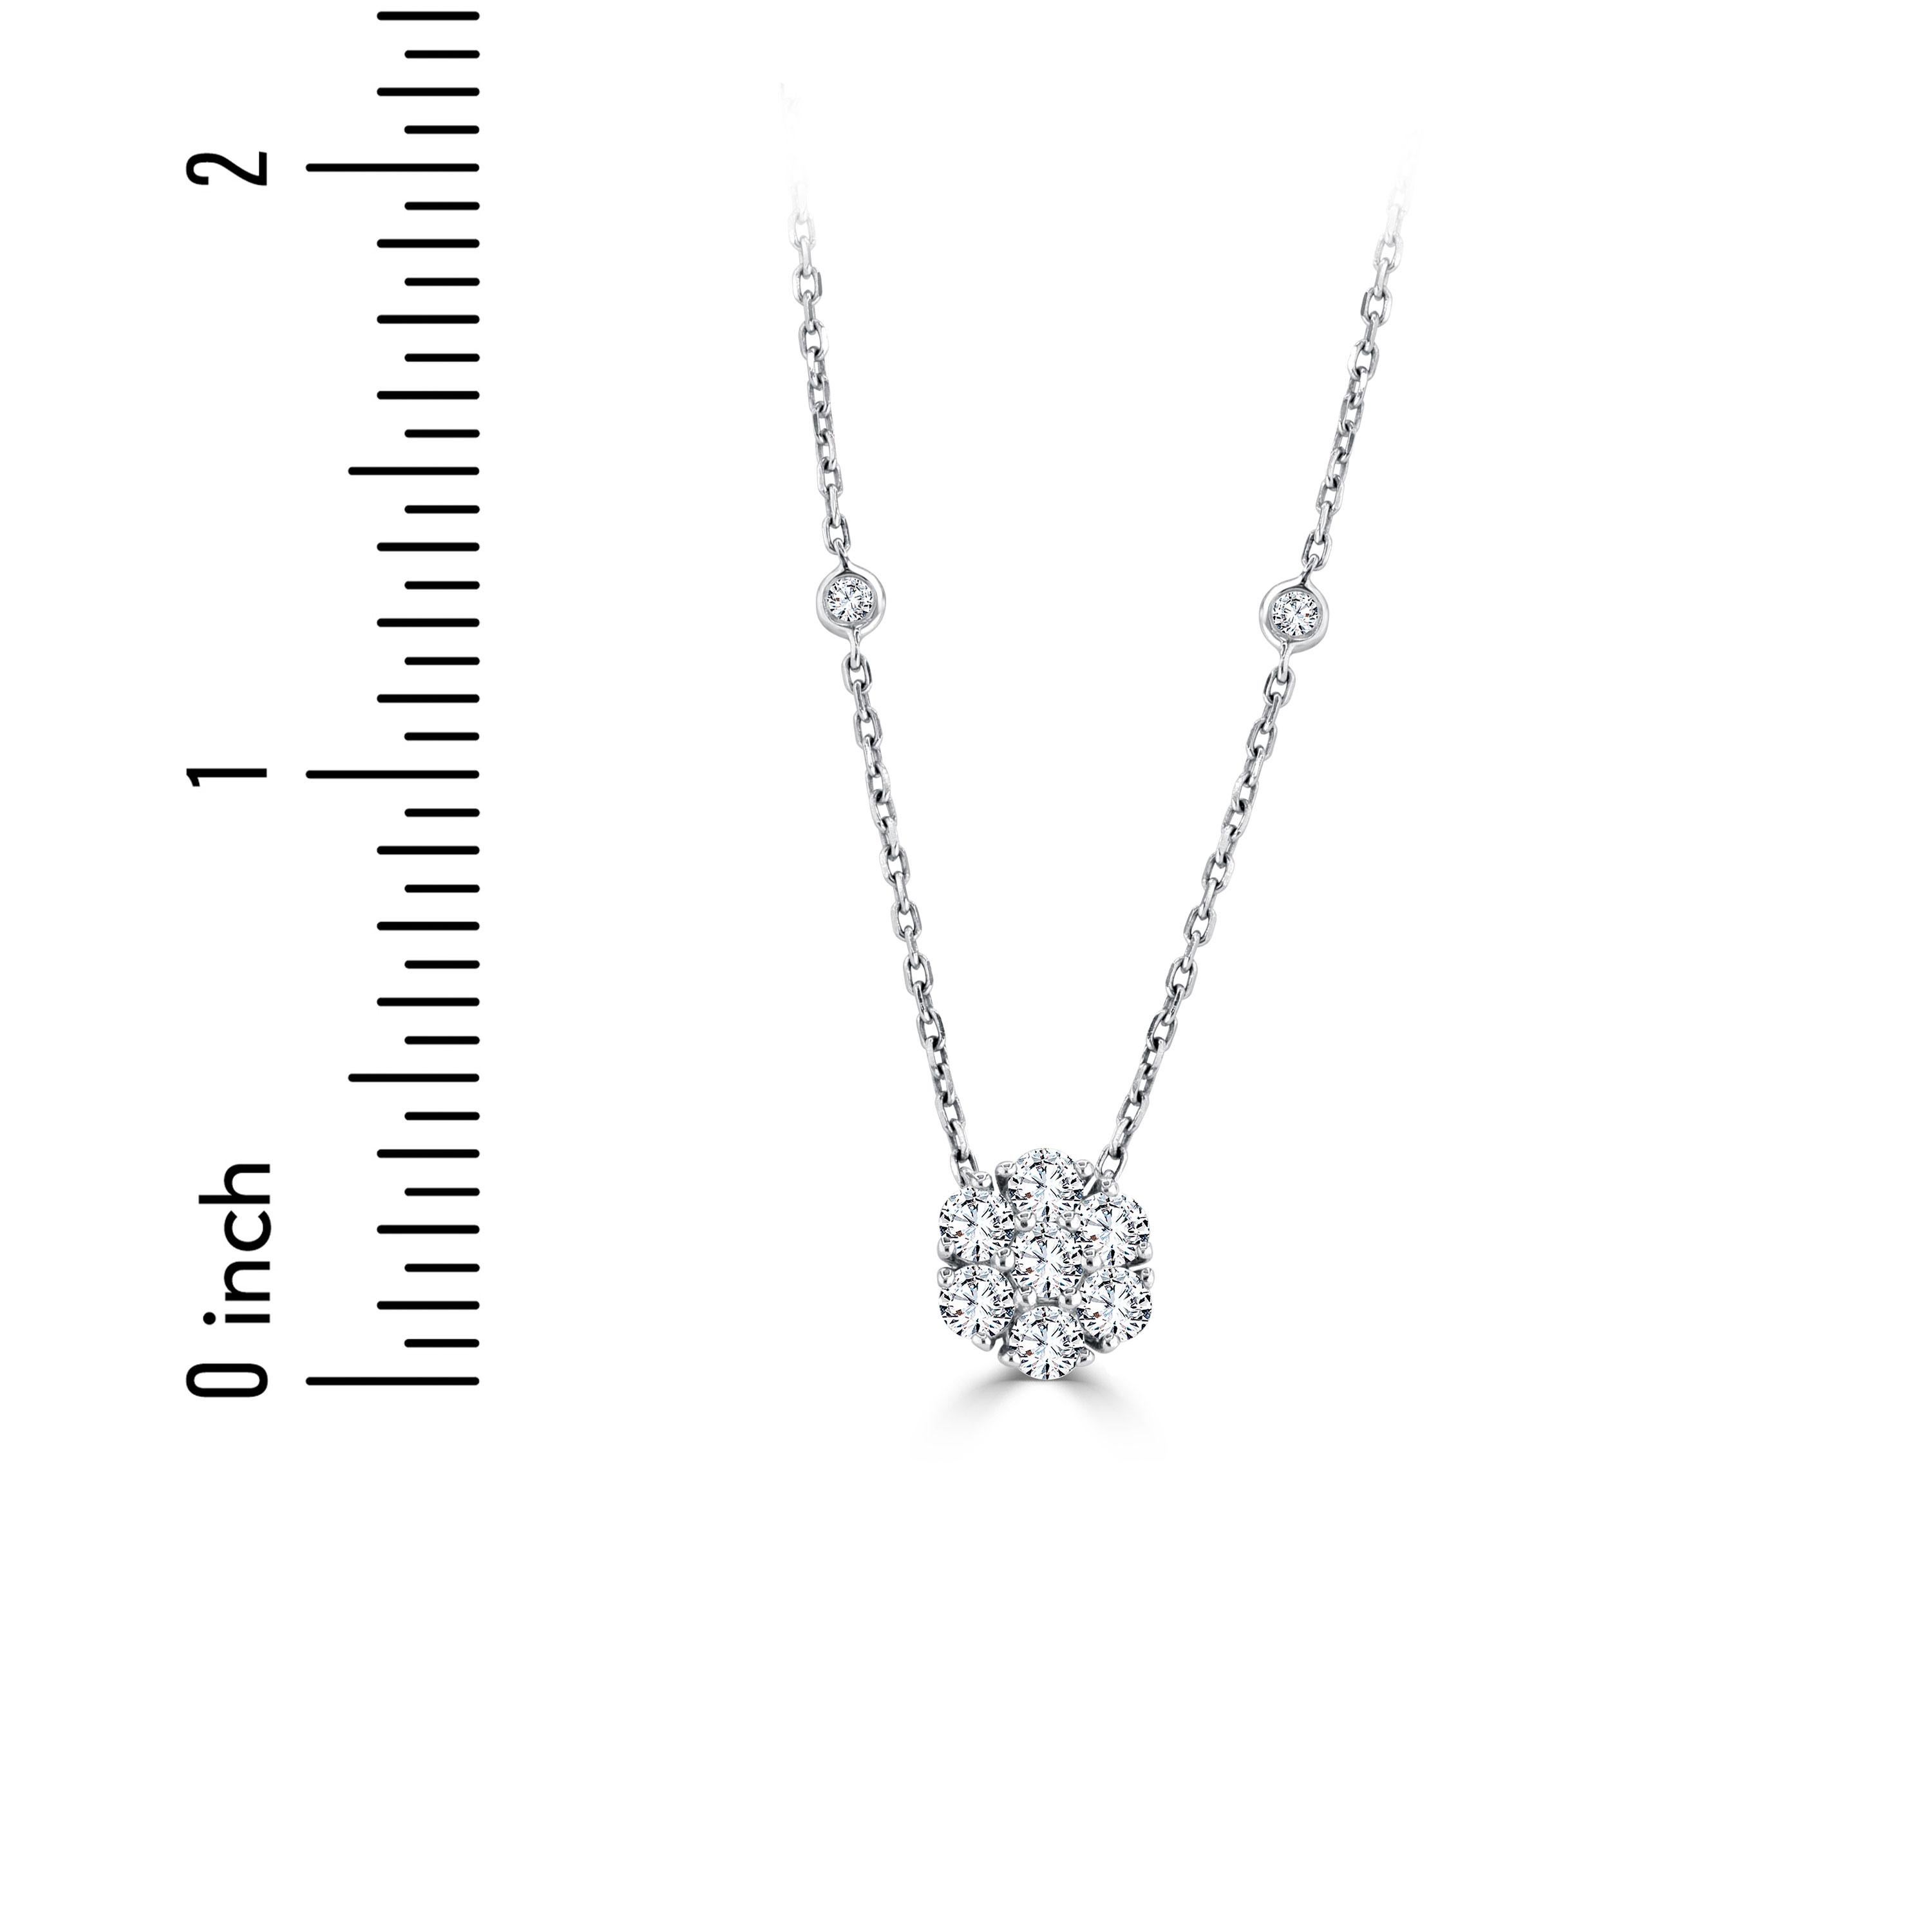 0.98 Carat Natural Diamond Flower Pendant in 14k White Gold ref1746 In New Condition For Sale In New York, NY